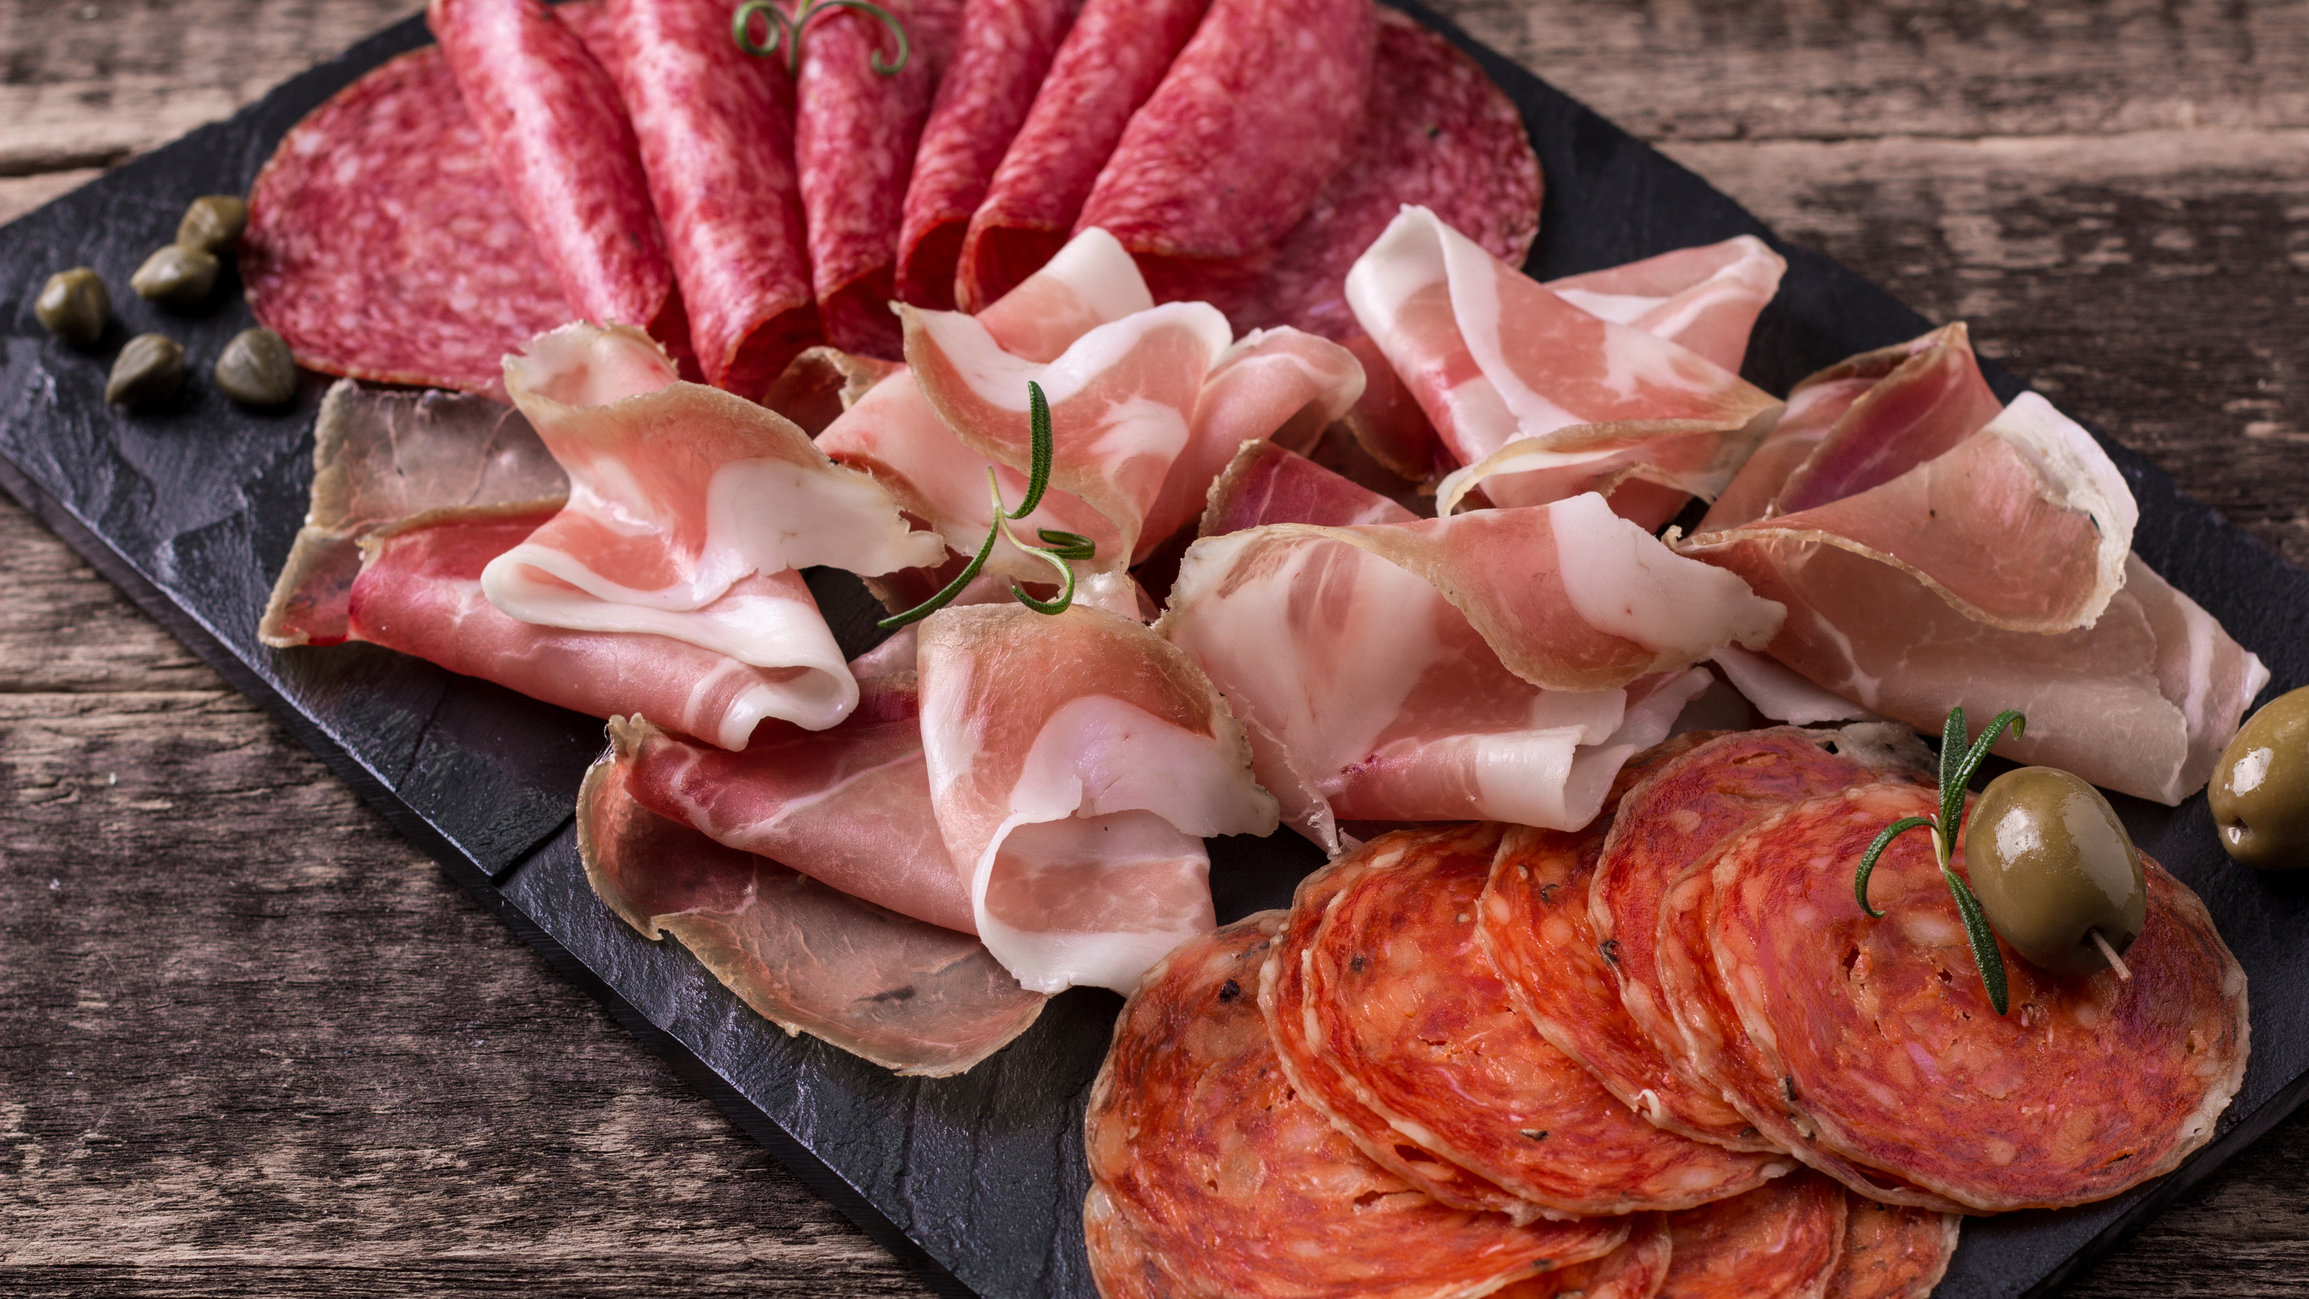 8-22-2018 Cold cuts_meat_nitrates_iStock-544670958